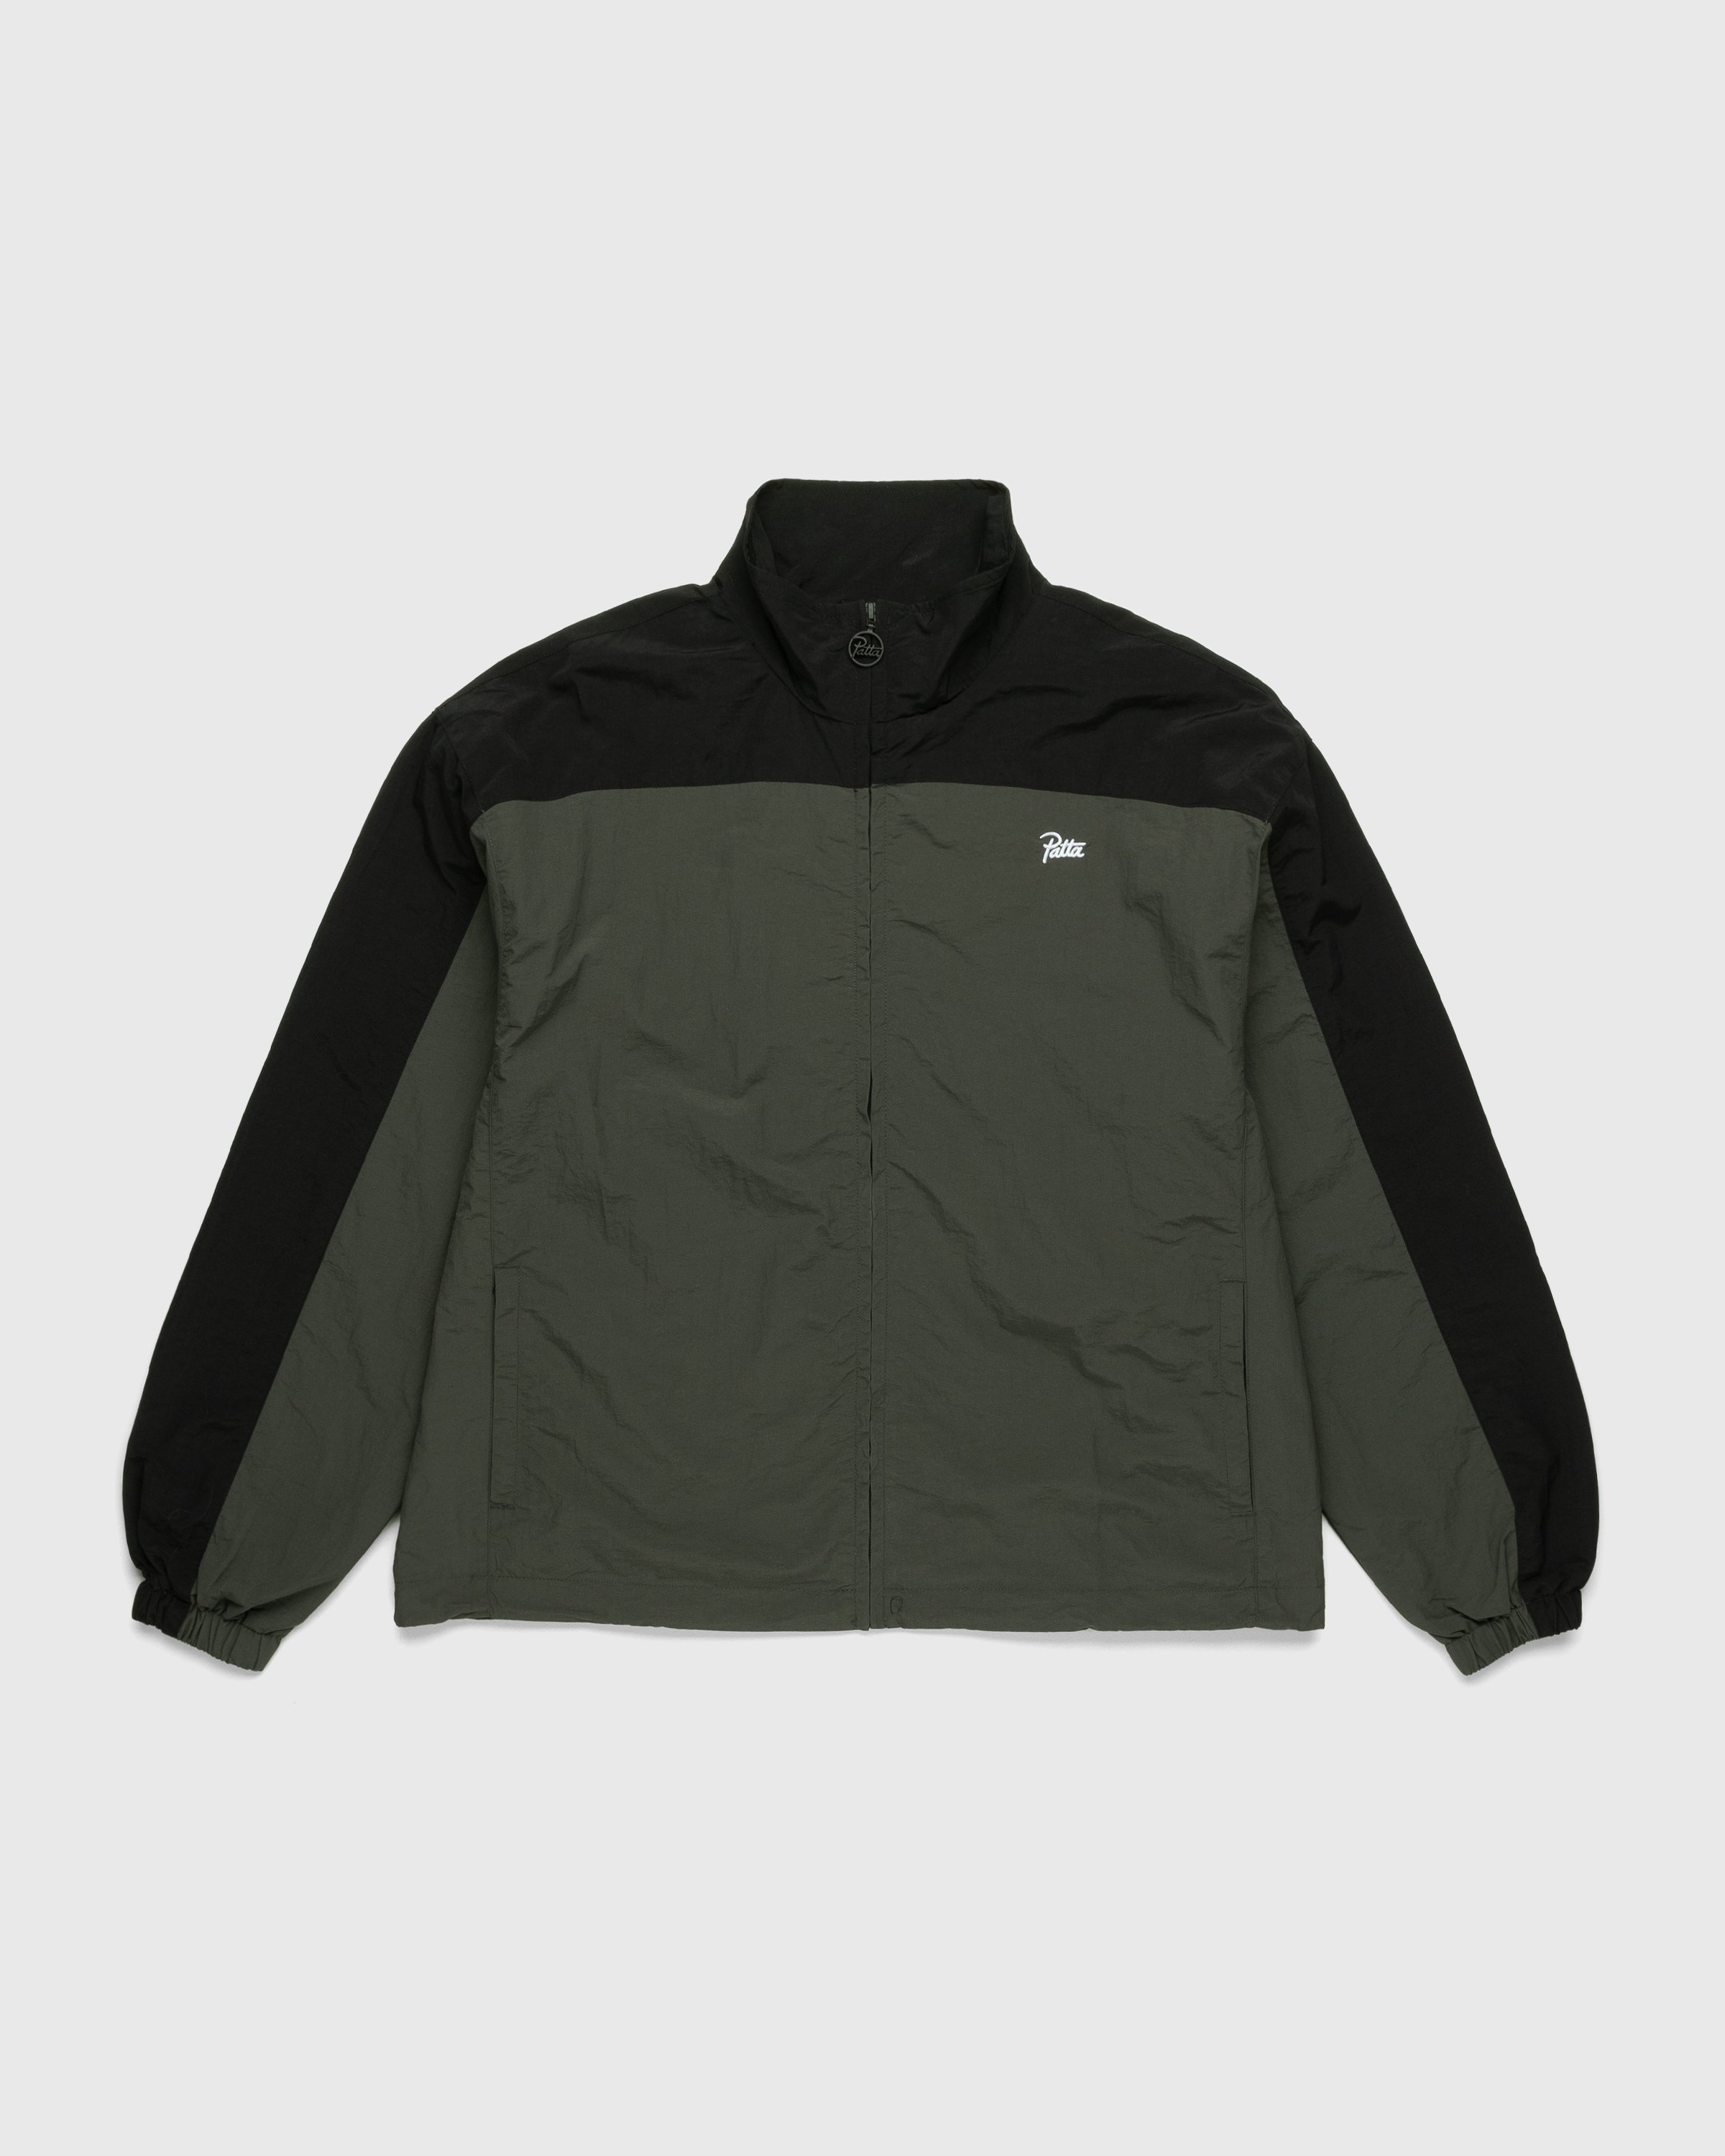 Patta – Athletic Track Jacket Black/Charcoal Grey - Outerwear - Black - Image 1